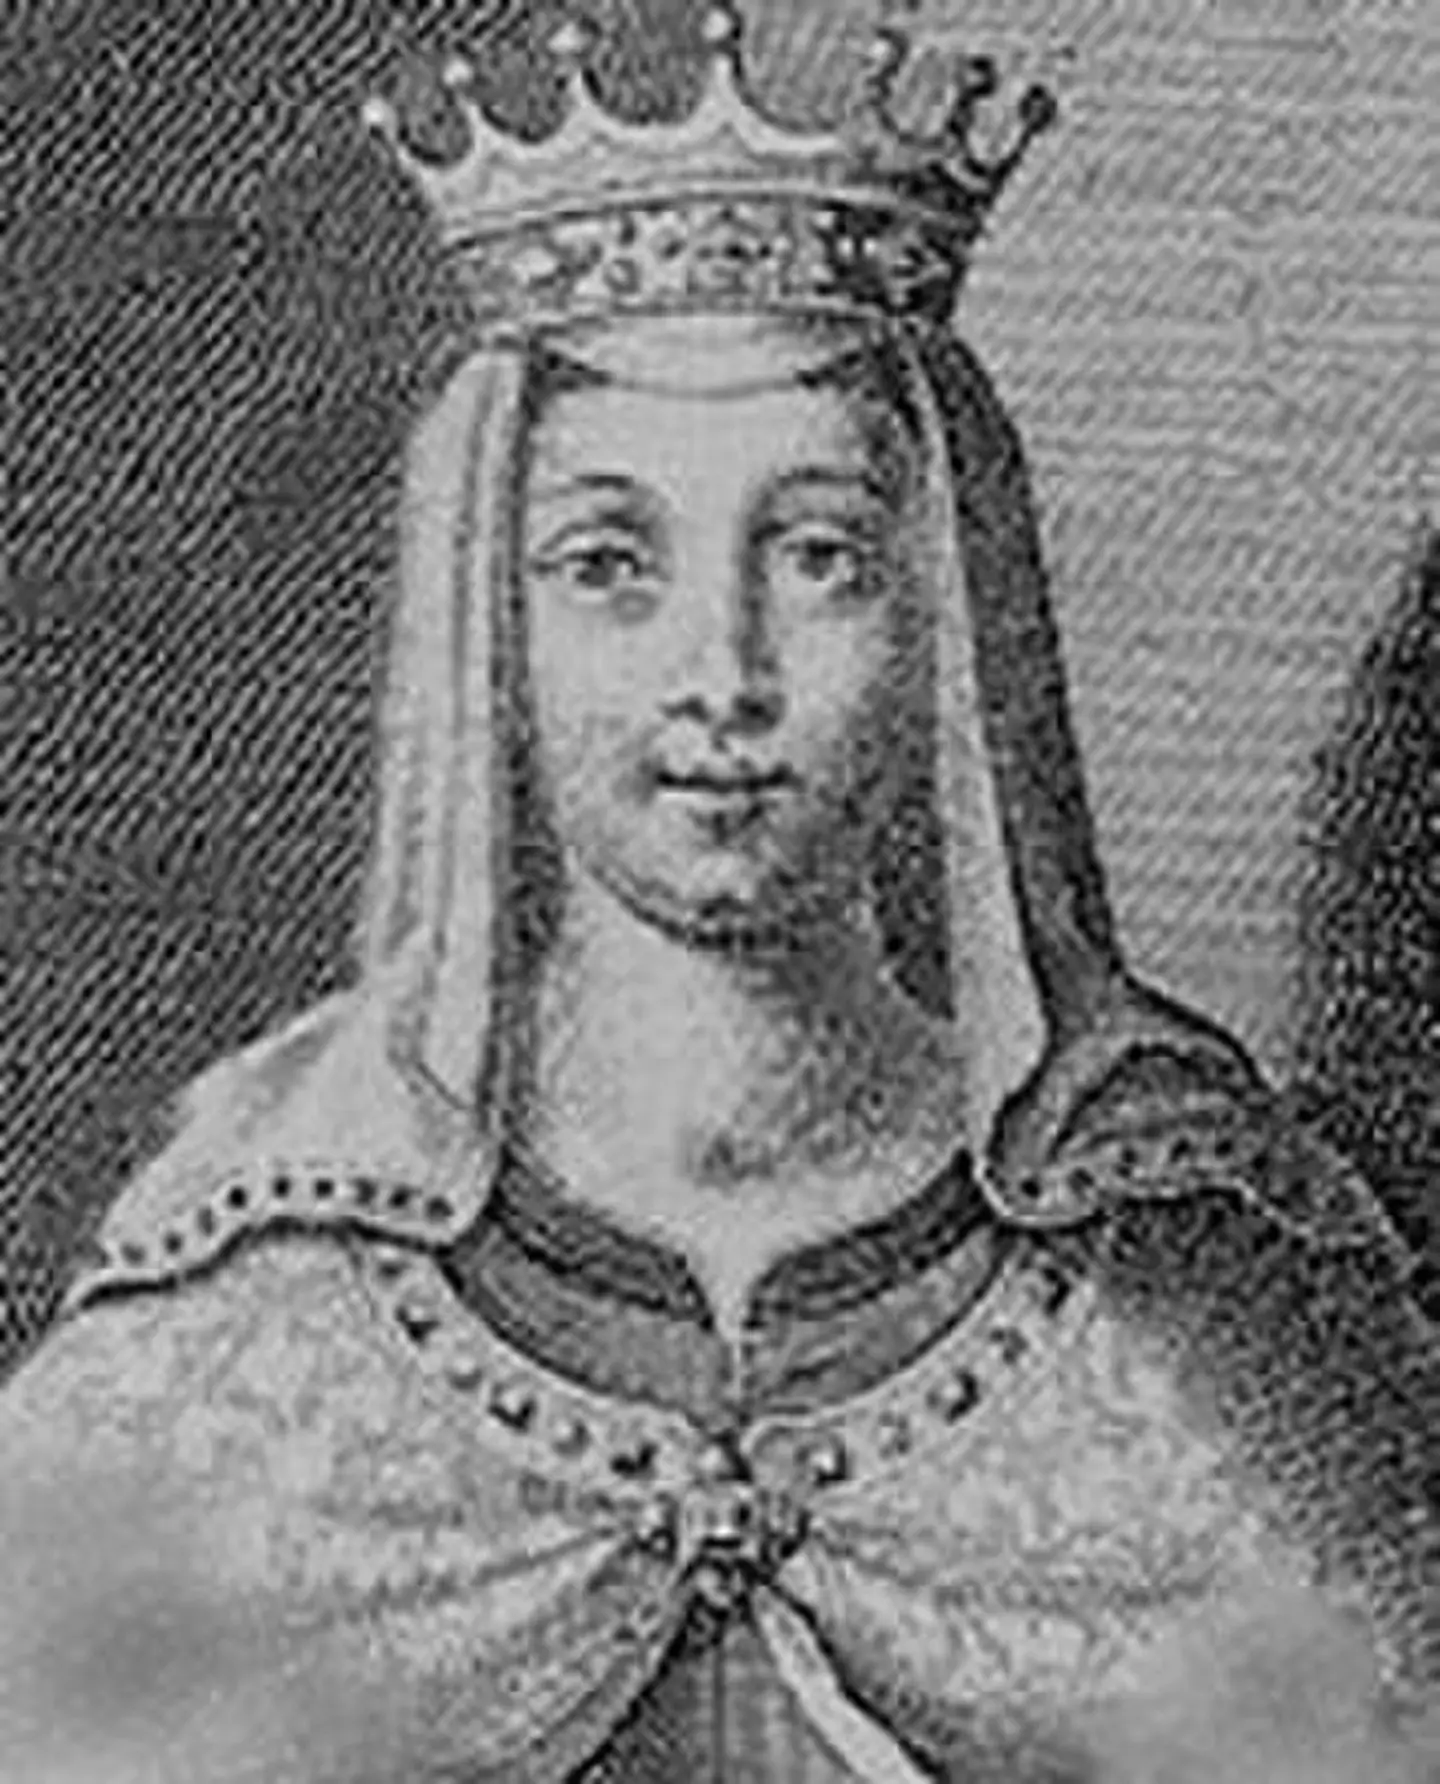 Empress Matilda escaped the castle during a fight for the crown.